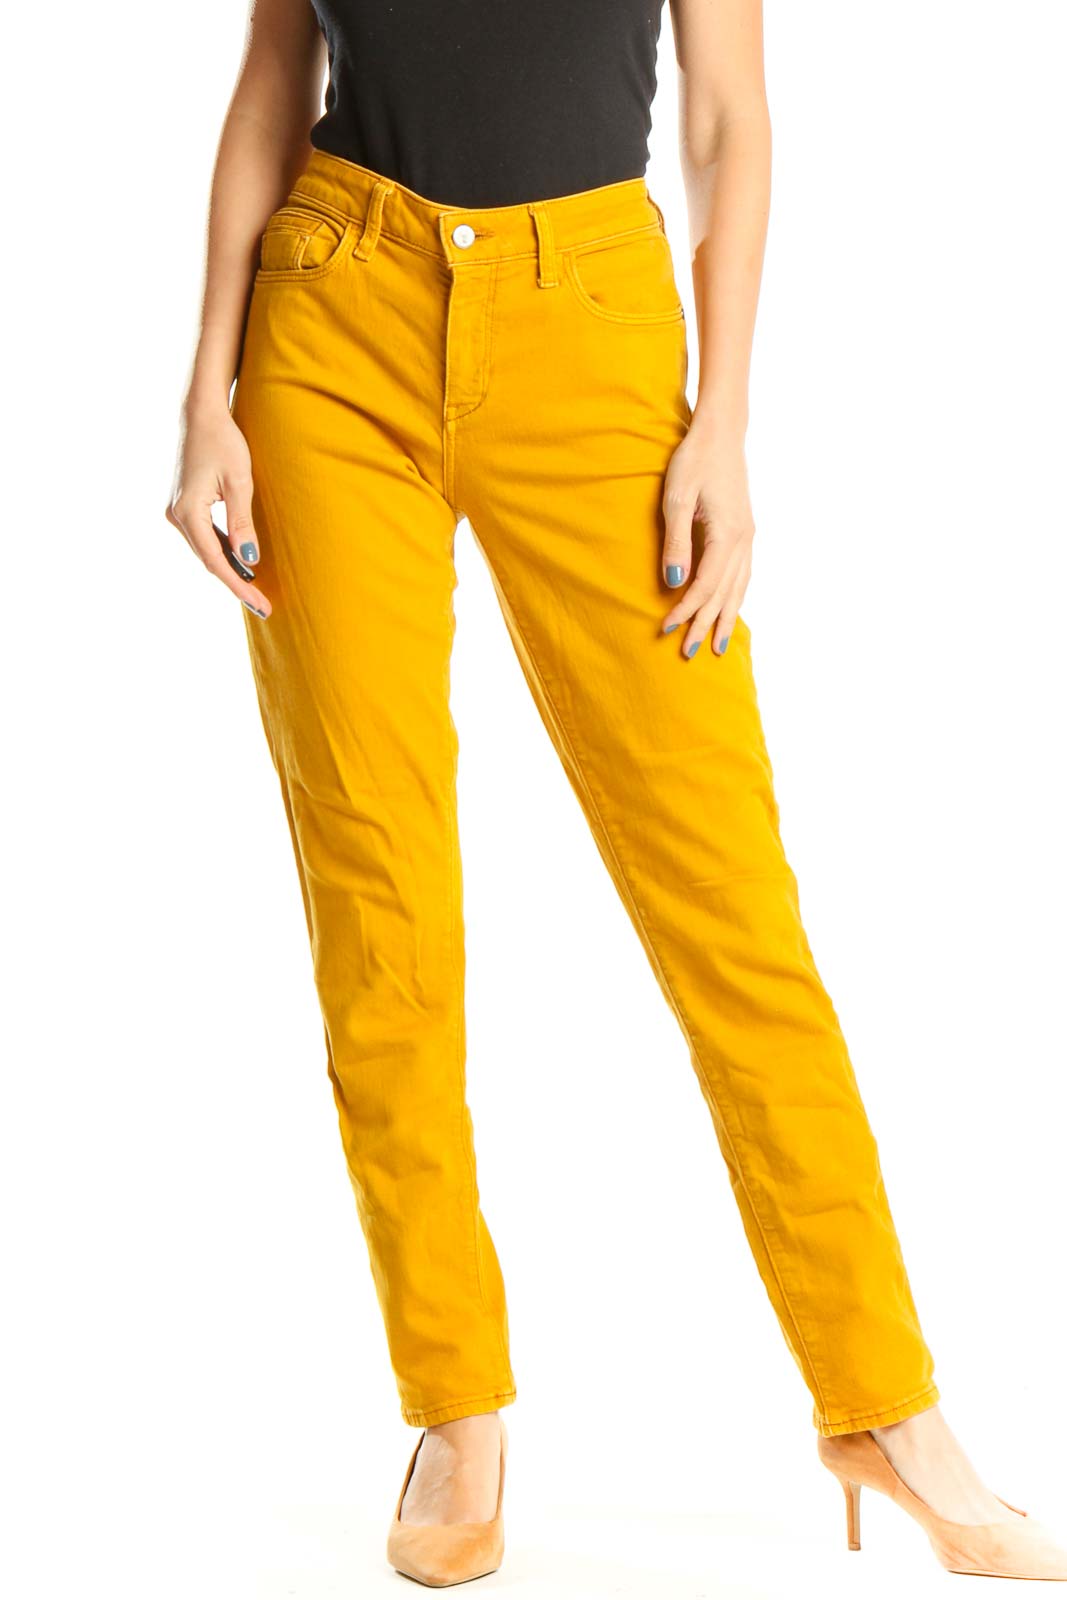 Yellow Straight Leg Jeans Front